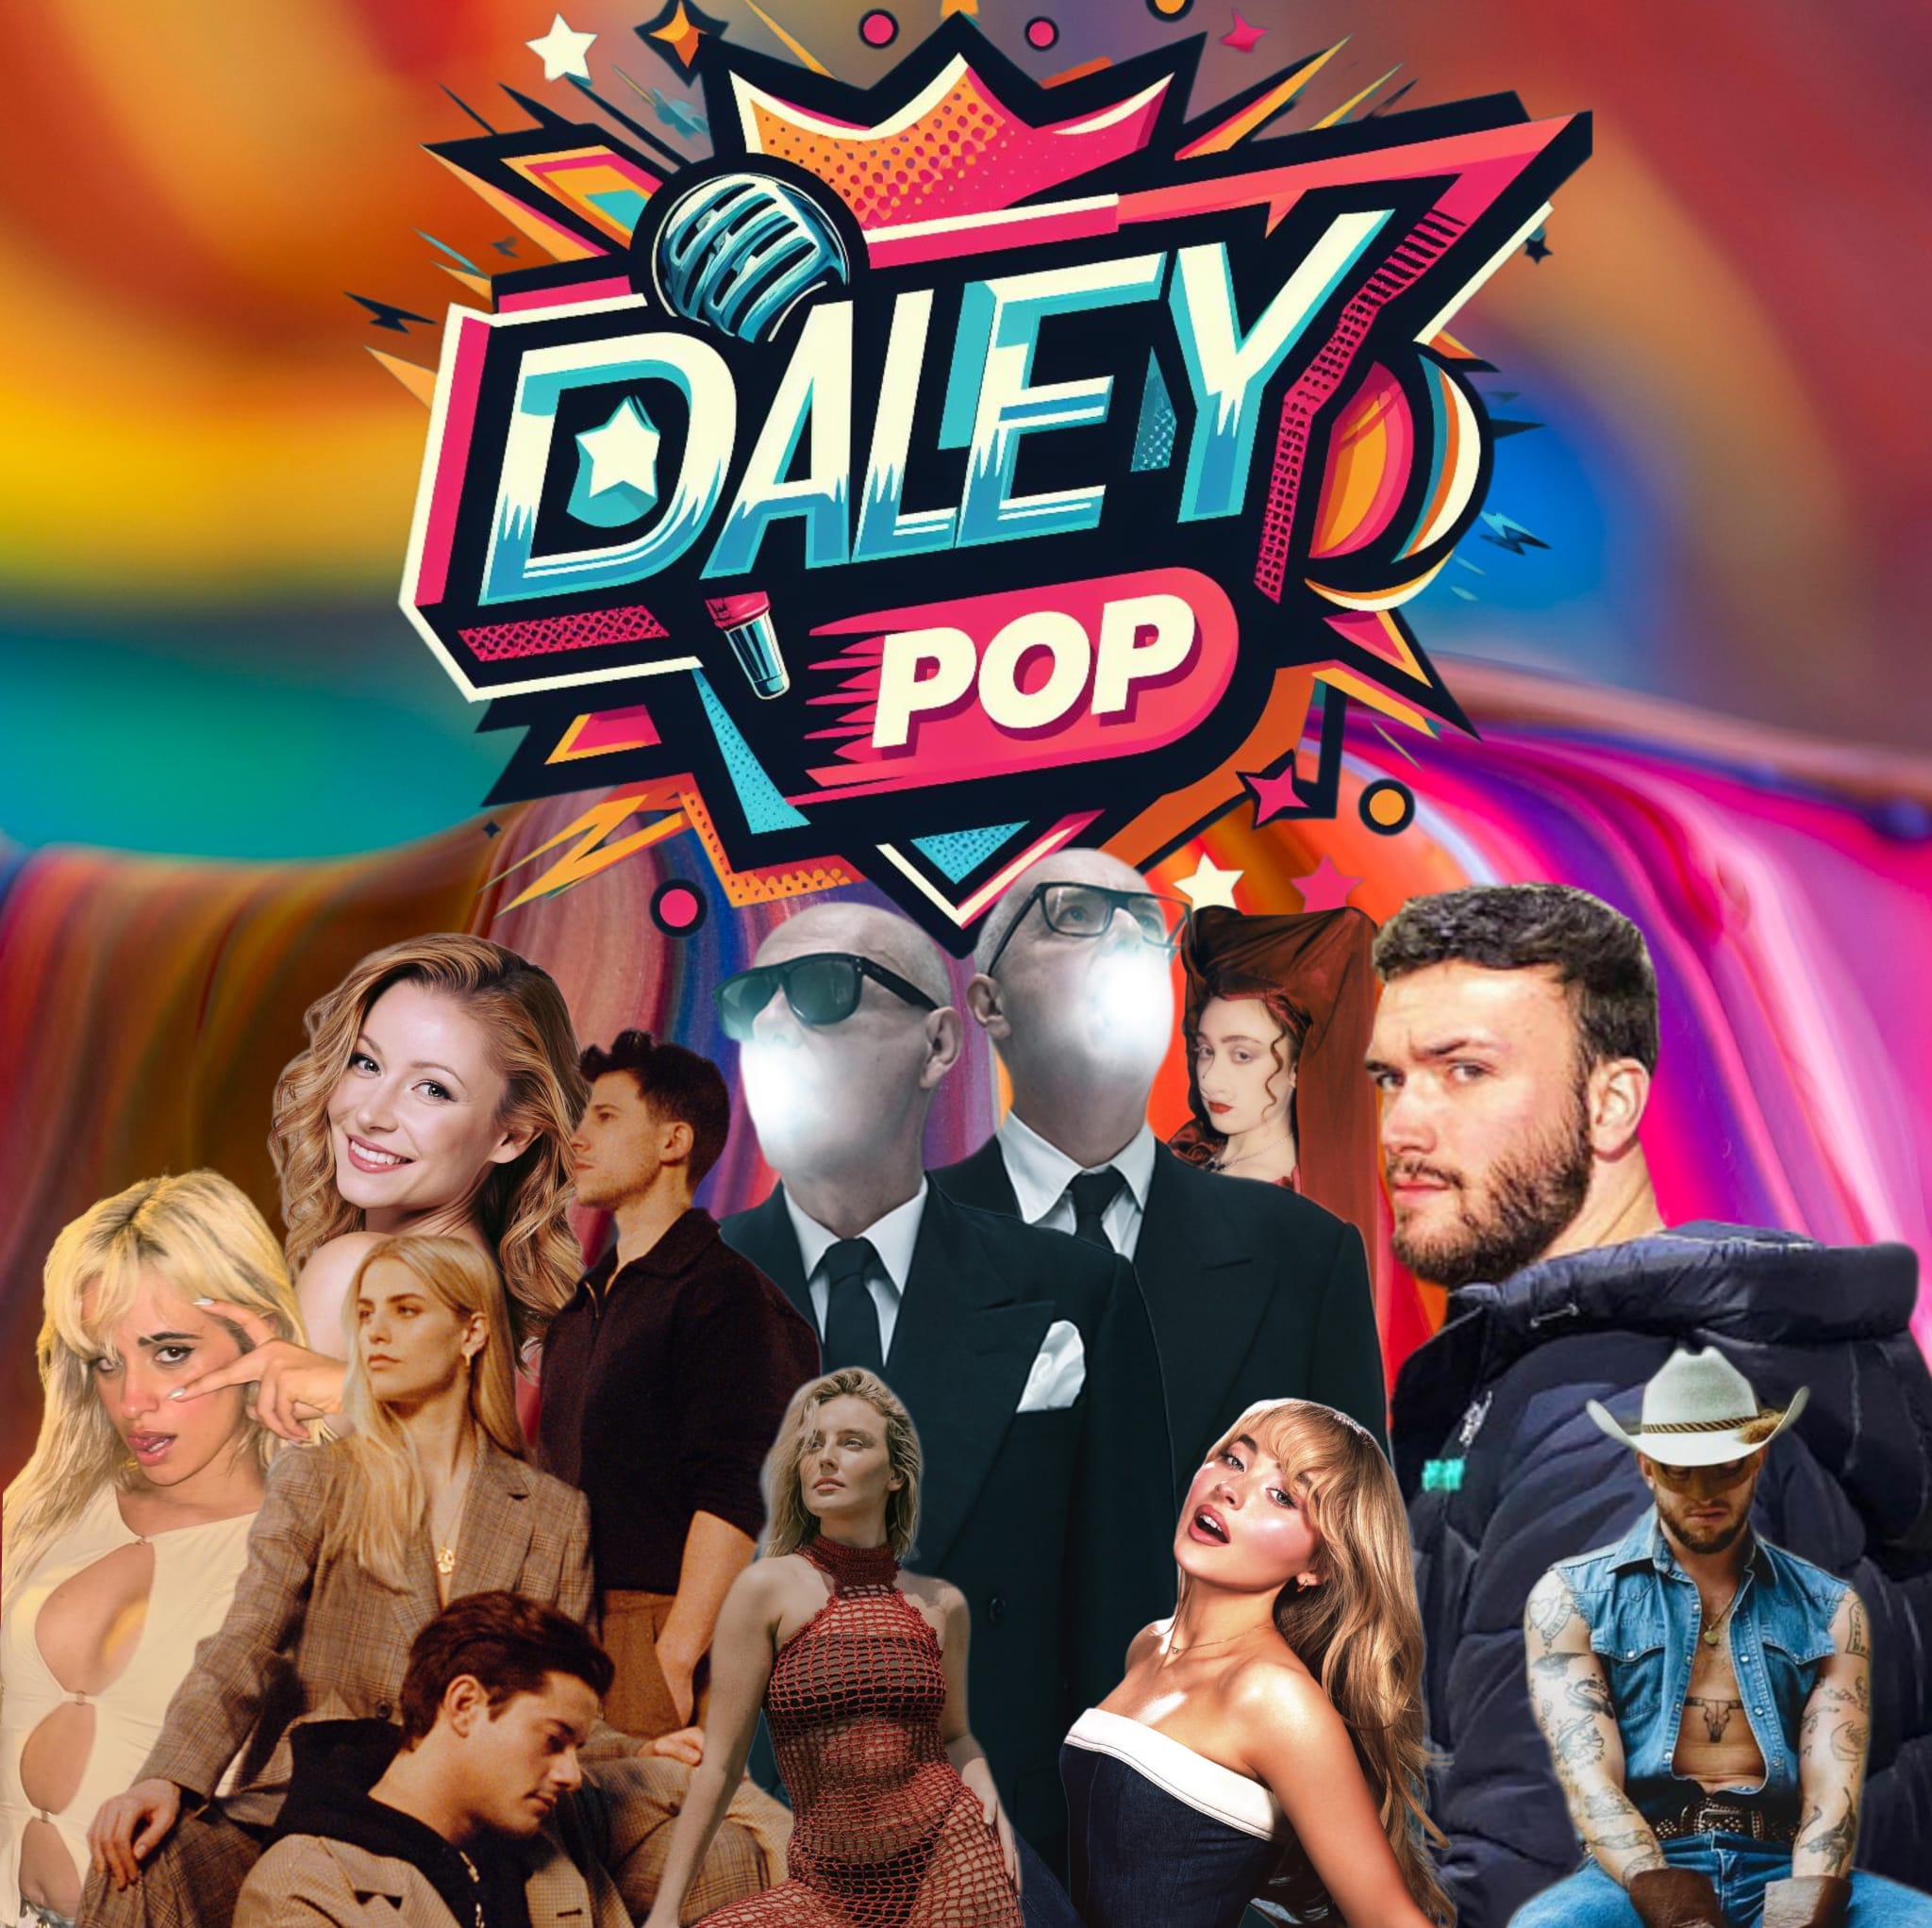 #DALEYPOP: New music from Pet Shop Boys, Sabrina Carpenter, Coulthard, Orville Peck, Chappell Roan and more😍